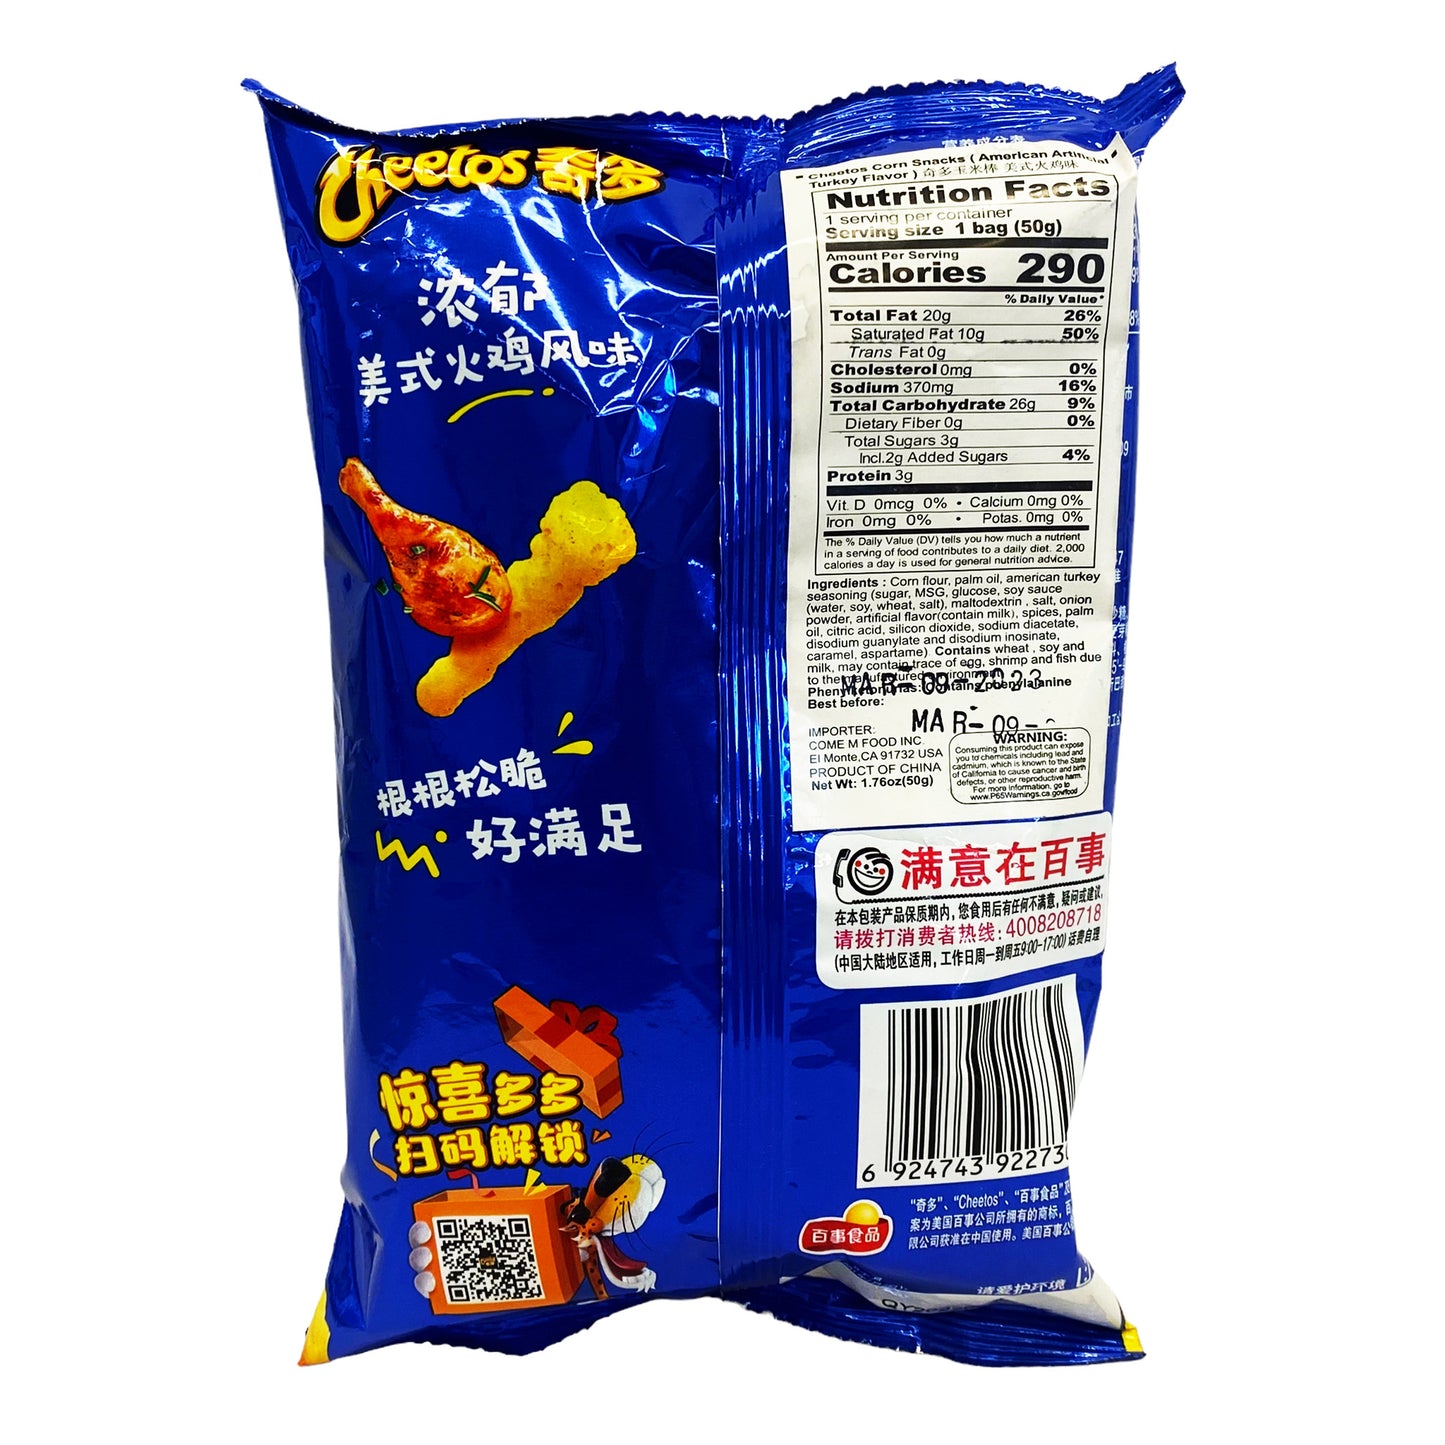 Back graphic view of Cheetos Roasted Corn Sticks - American Roasted Turkey Flavor 1.76oz (50g)